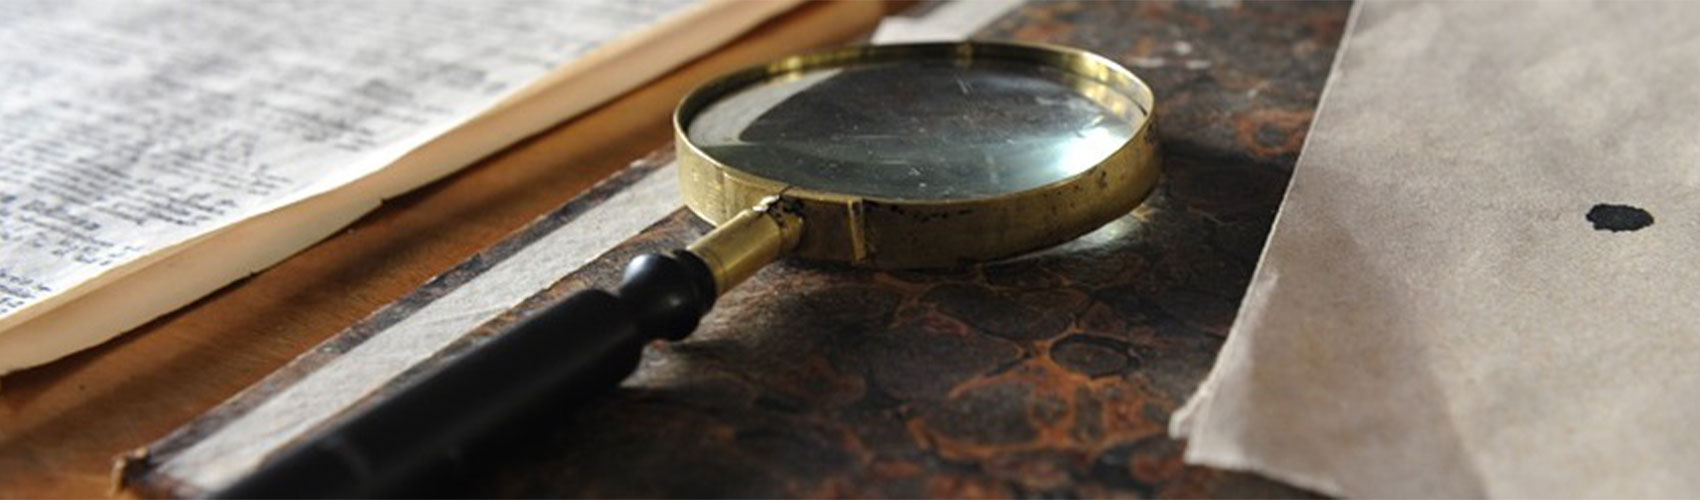 A black and gold magnifying glass resting on a speckled notebook